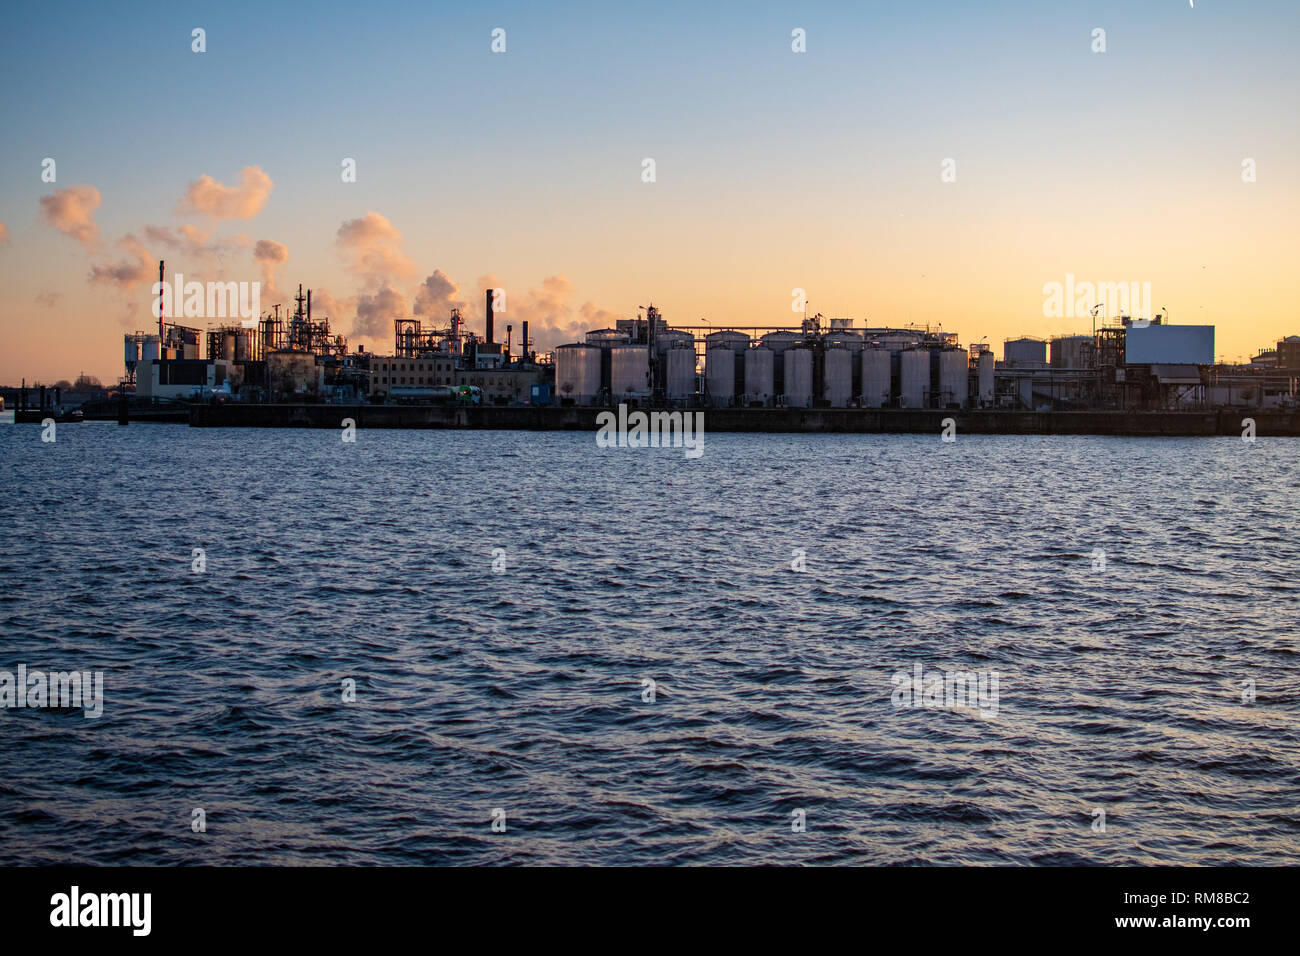 Panorama of industrial cityscape with metallurgical and chemical plants and big . Smoke pipes emissions. A background of an orange-colored sky Stock Photo